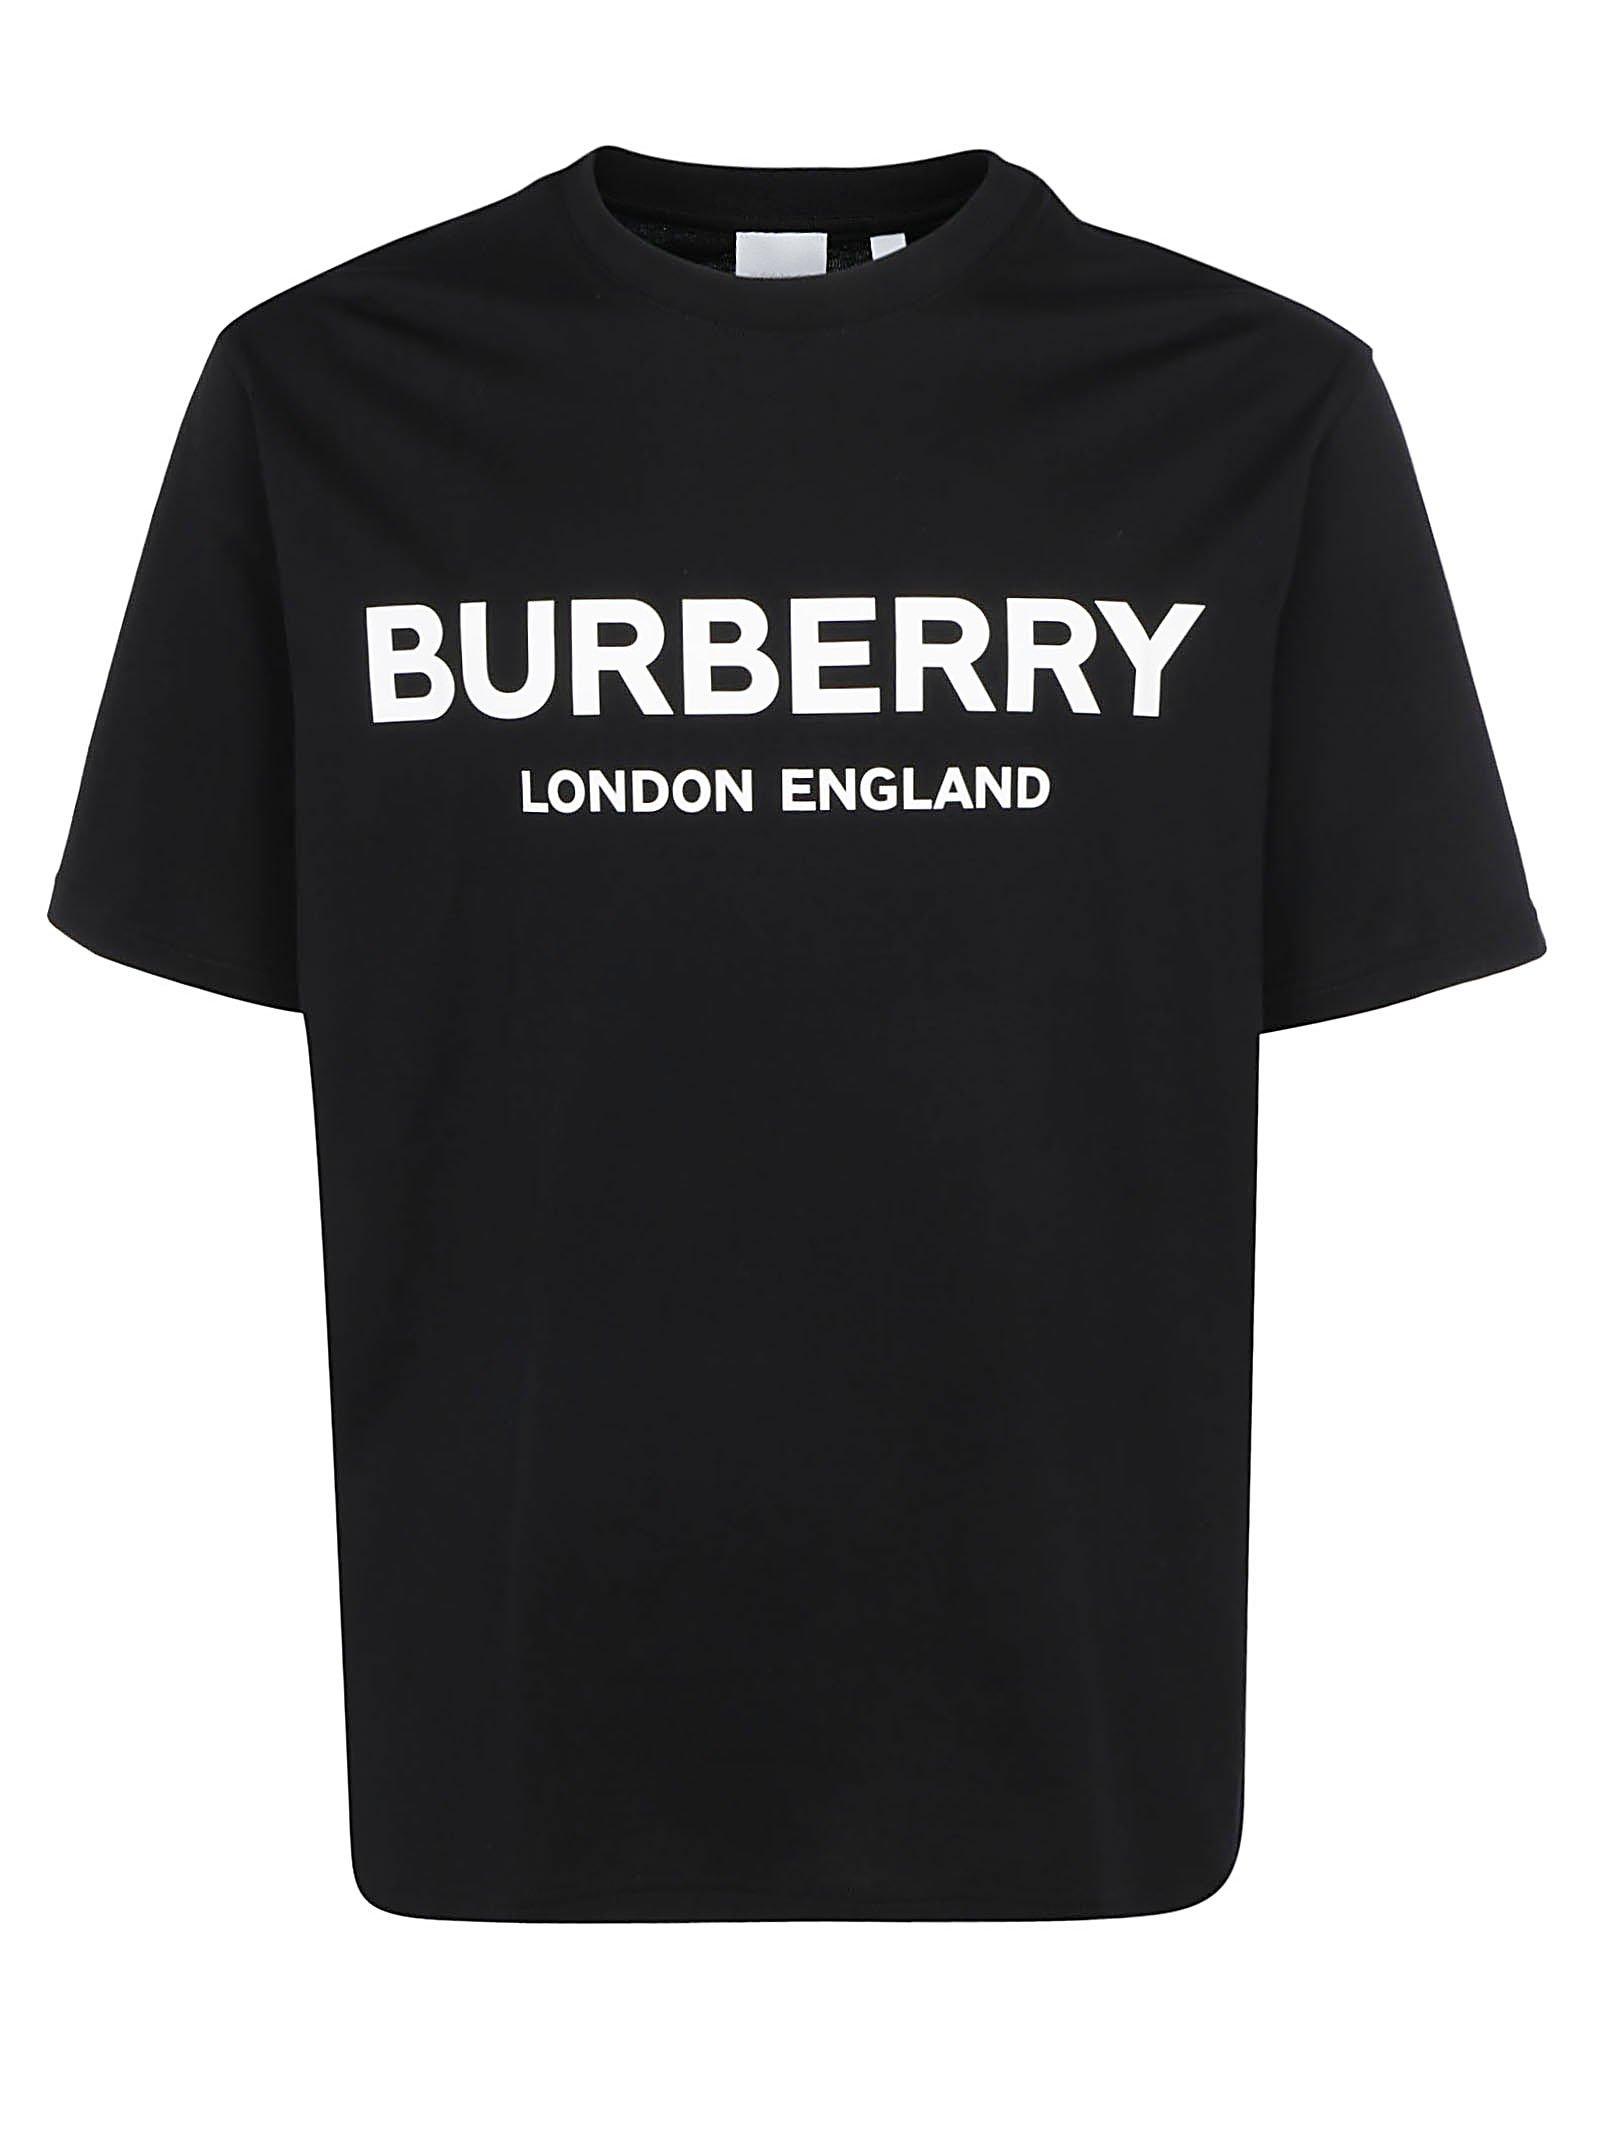 Burberry Logo Print Cotton T Shirt in Black for Men - Save 57% - Lyst